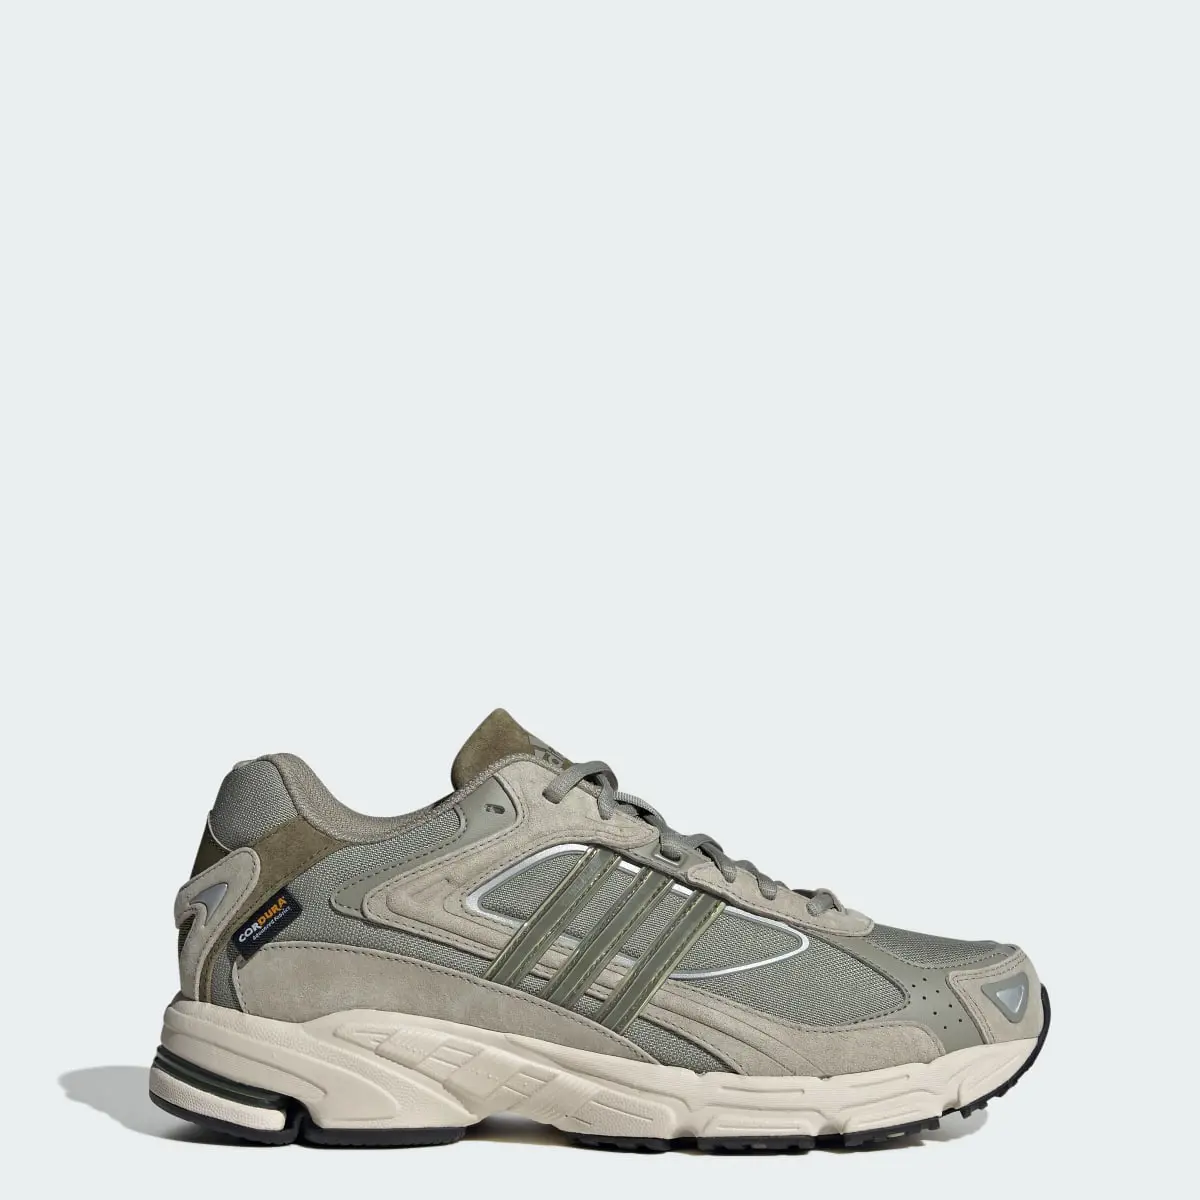 Adidas Chaussure Response CL. 1